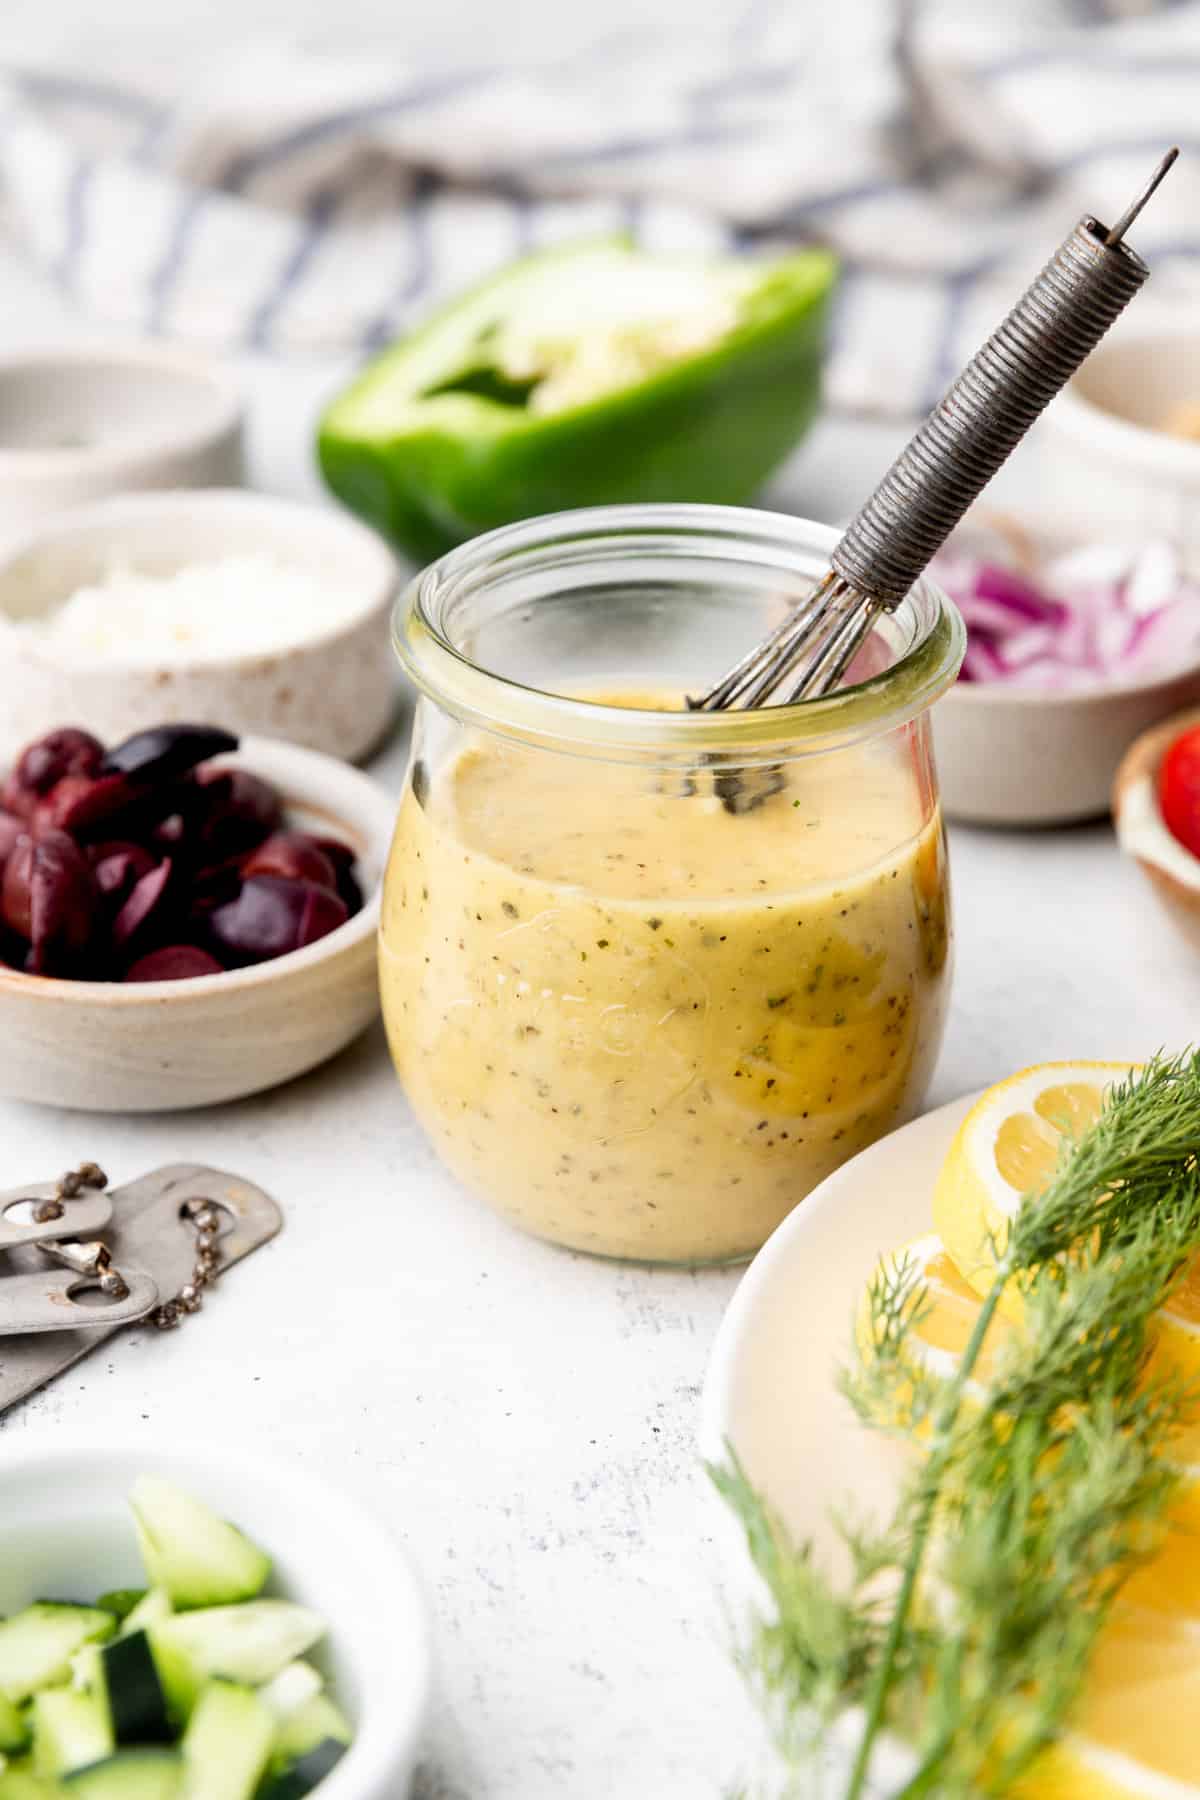 Whole30 Approved Salad Dressings 2023 - Olive You Whole